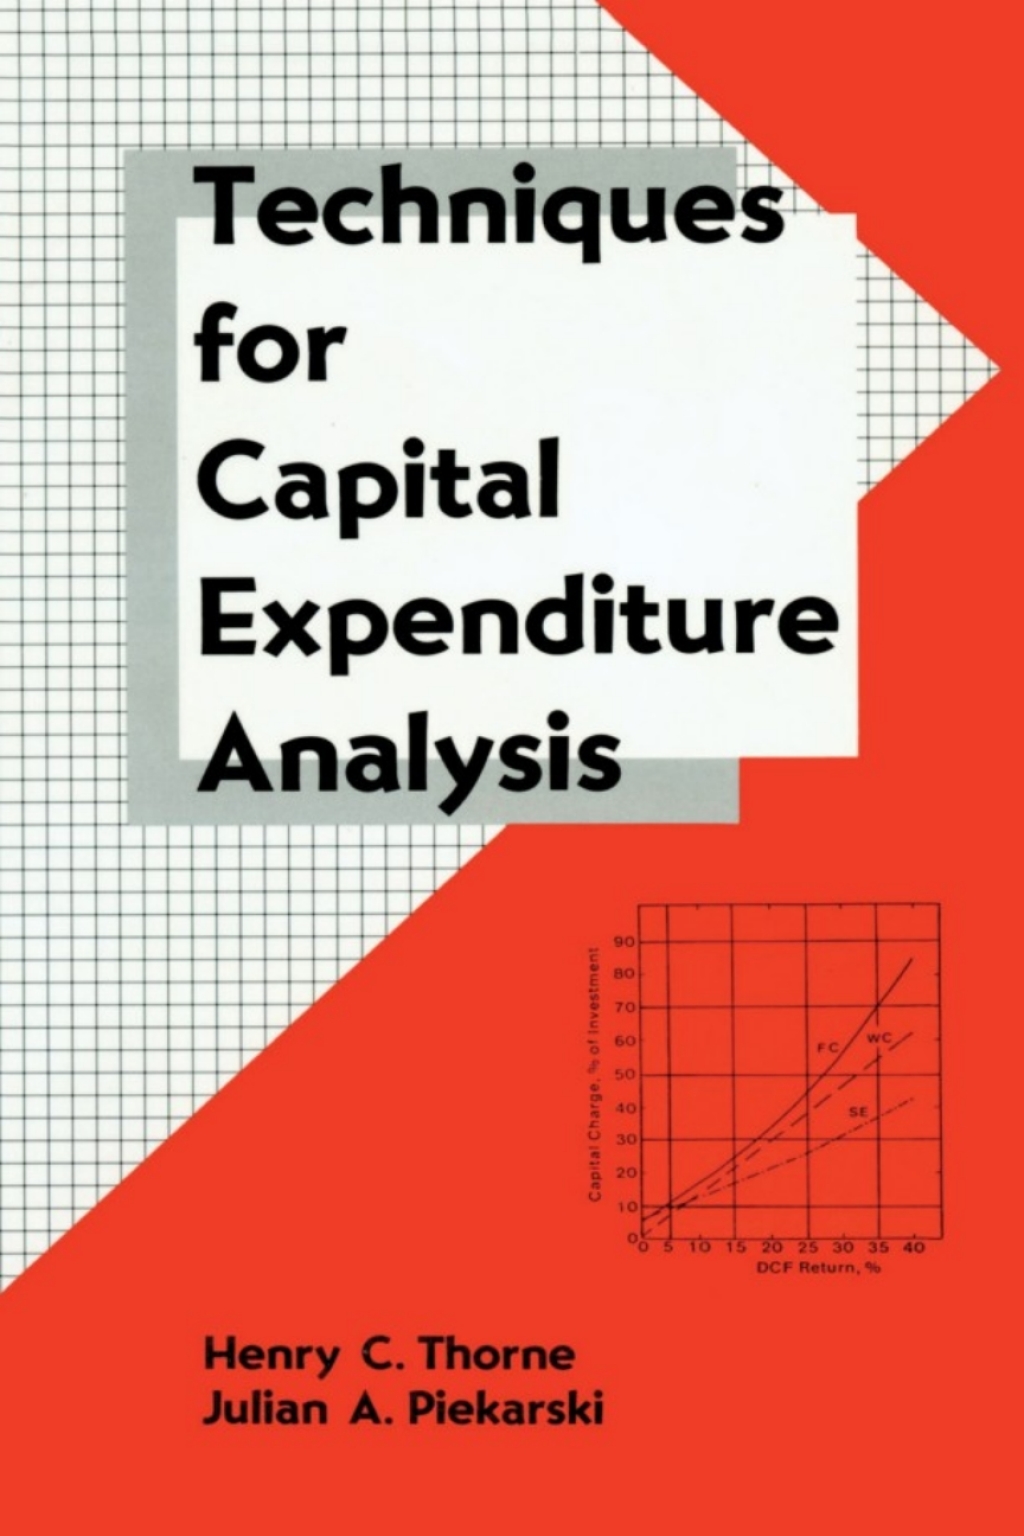 ISBN 9780824790844 product image for Techniques for Capital Expenditure Analysis - 1st Edition (eBook Rental) | upcitemdb.com